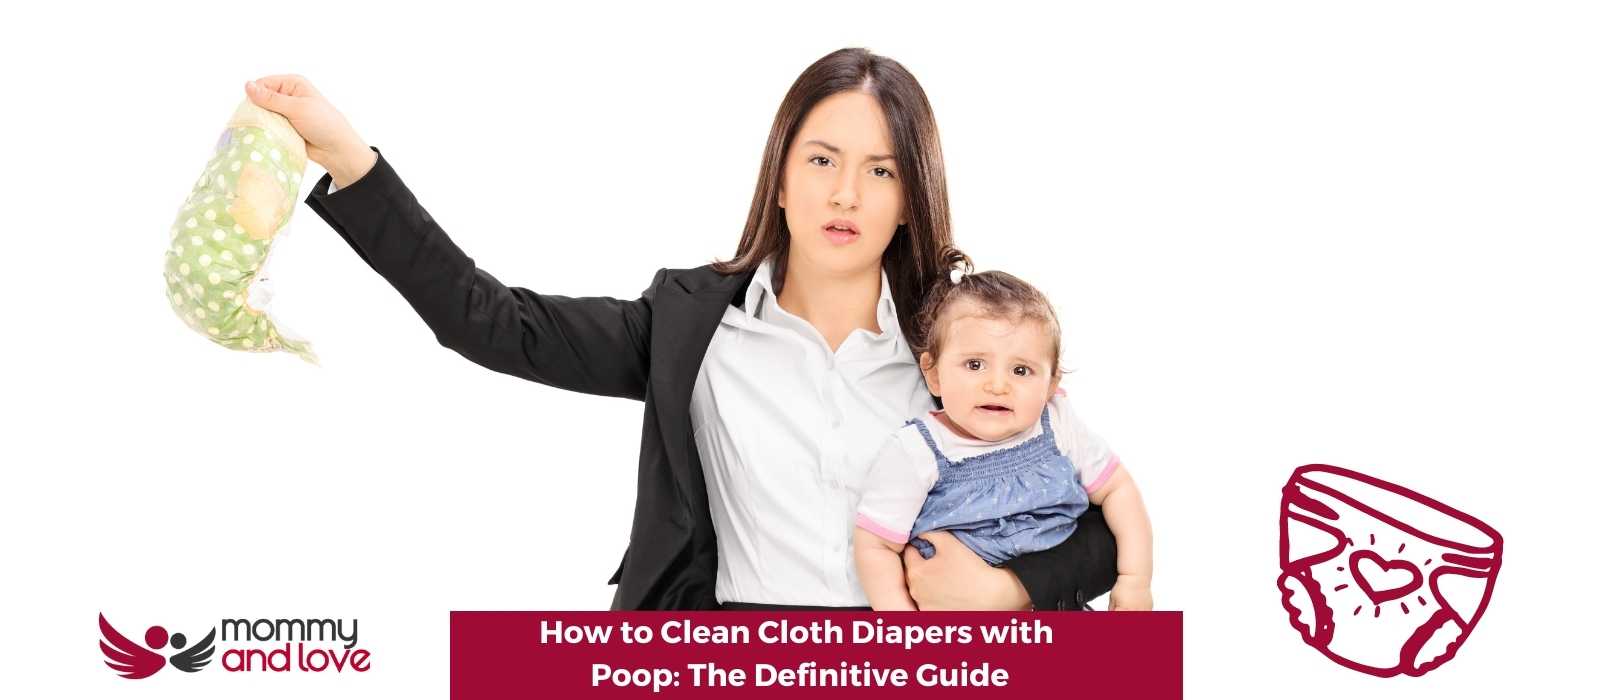 How to Clean Cloth Diapers with Poop The Definitive Guide